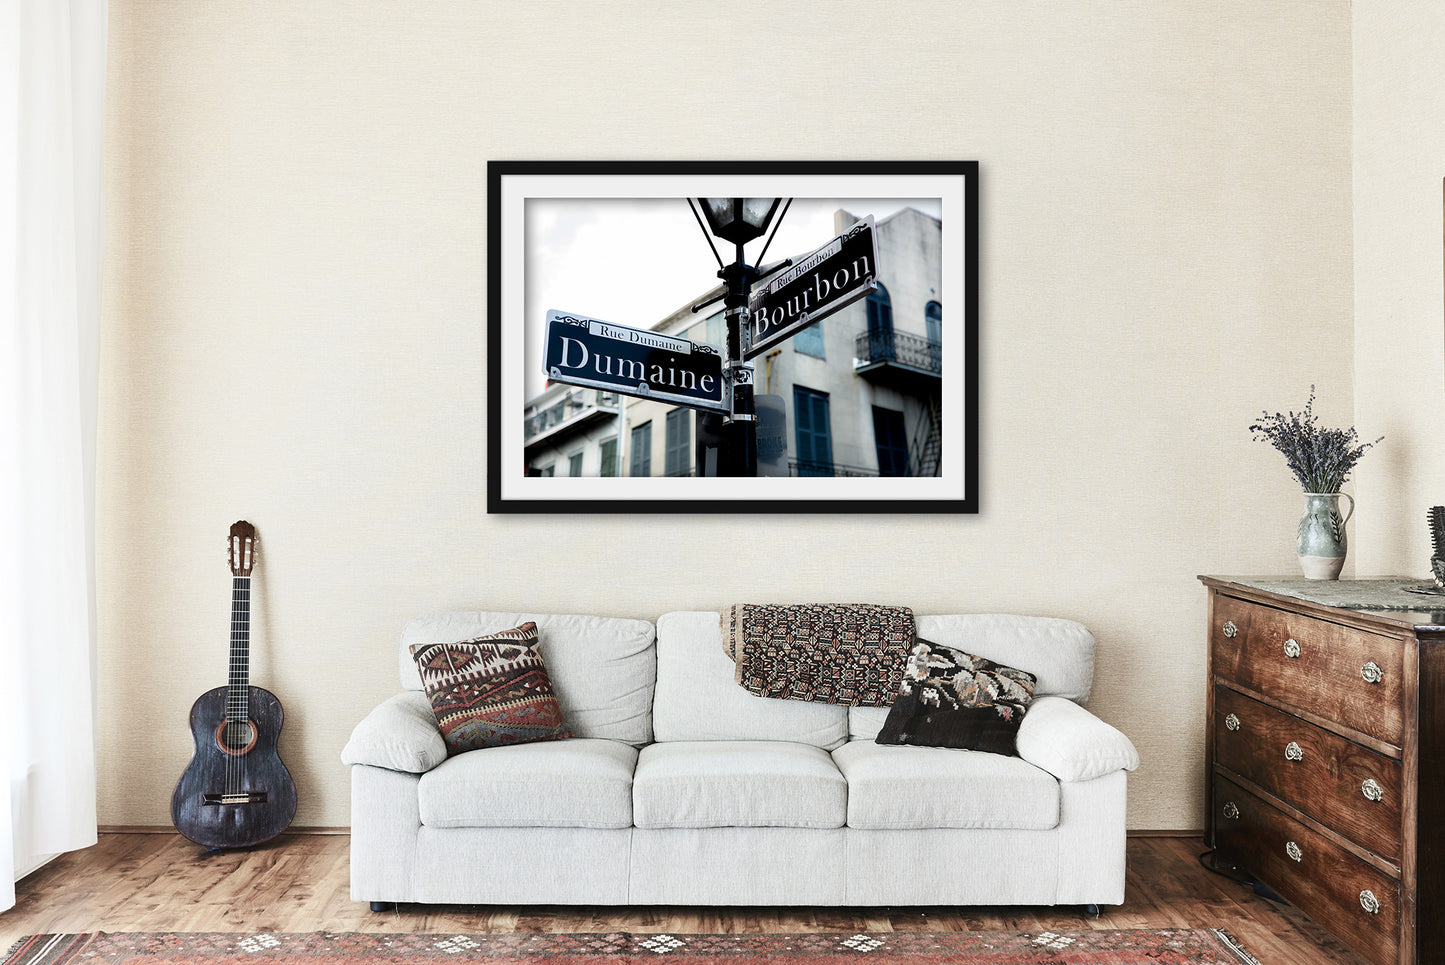 French Quarter Framed Print - Picture of Signs at Intersection of Dumaine and Bourbon Street in New Orleans - NOLA Wall Art Photo Artwork